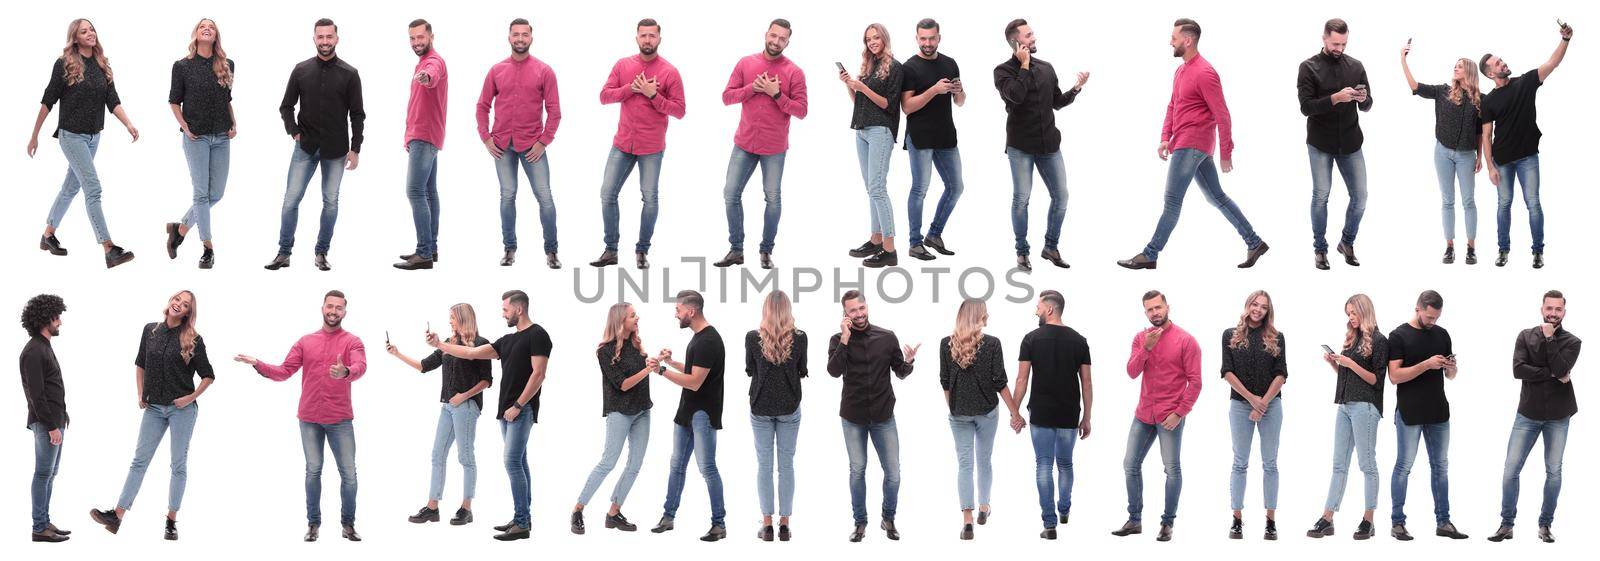 collage of photos of diverse young people. isolated on a white background